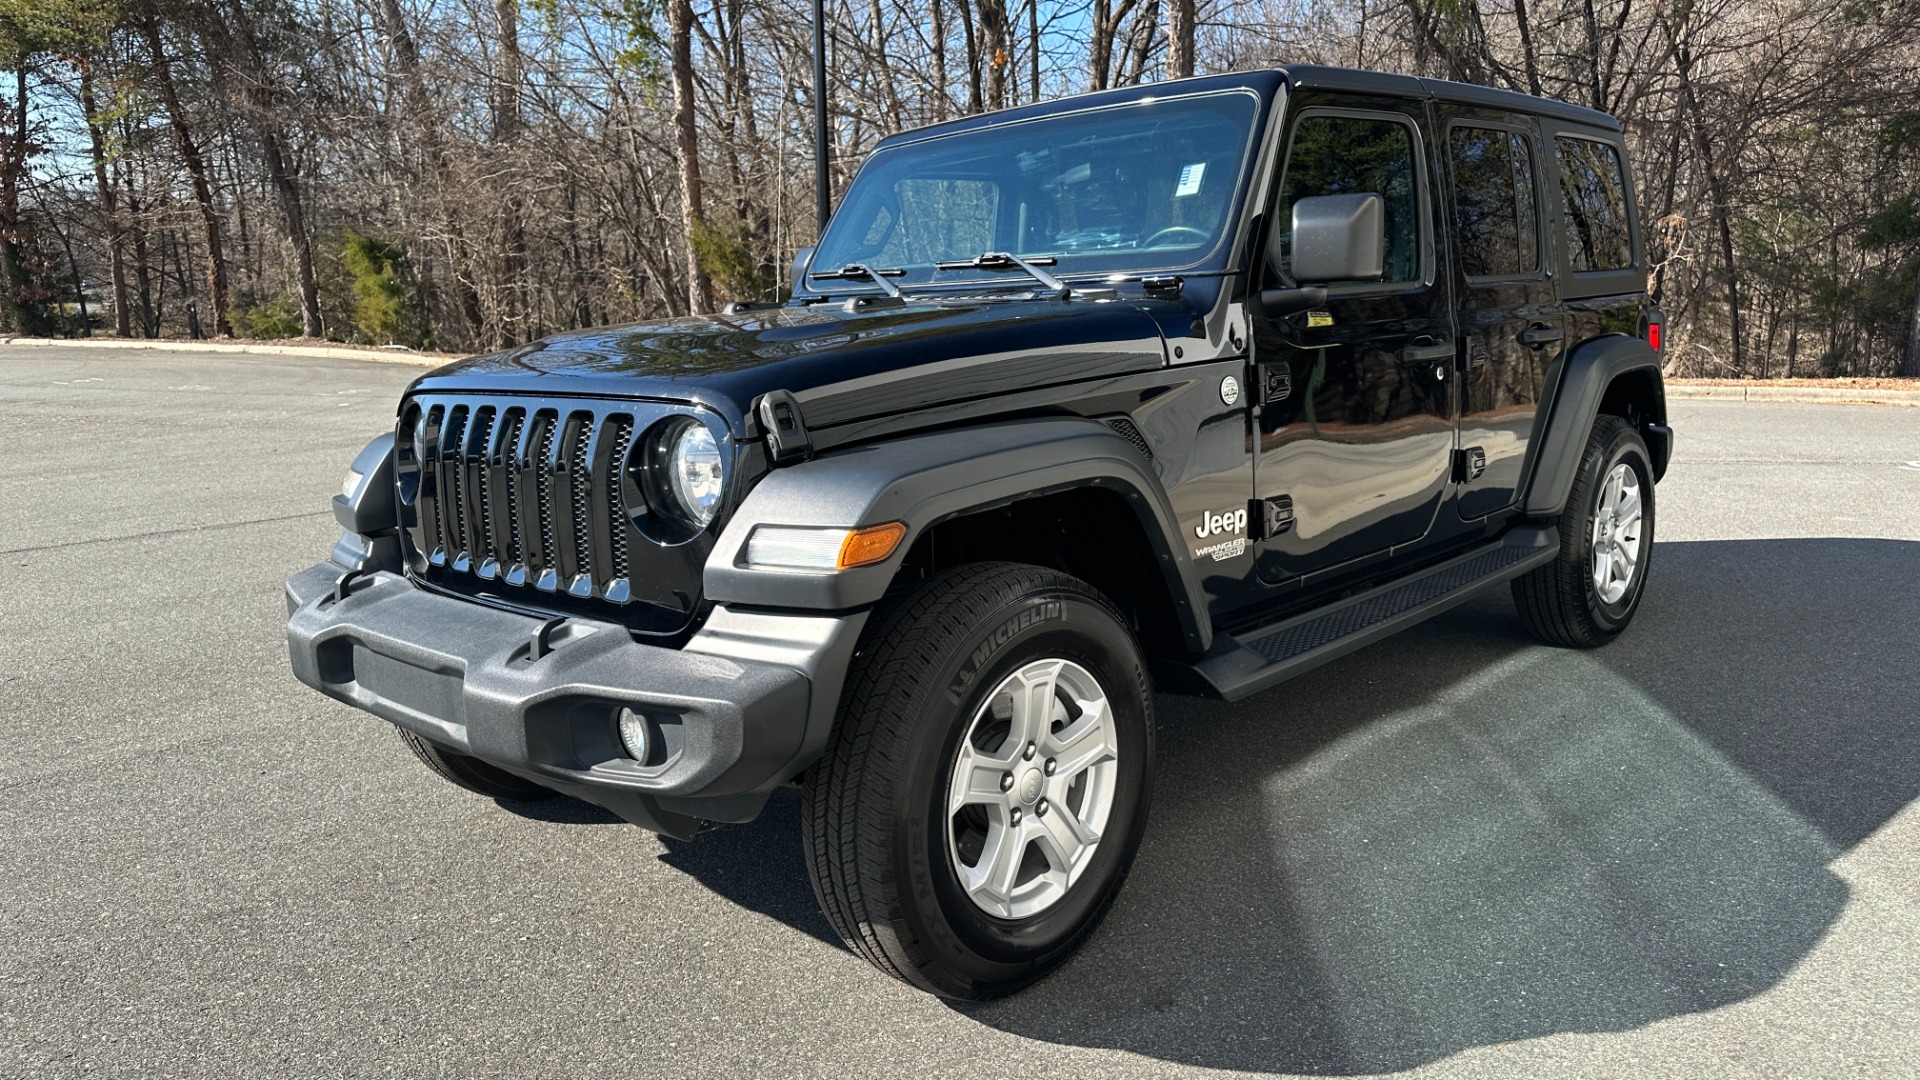 Used 2020 Jeep Wrangler Unlimited SPORT S / TECH PACKAGE / S PACKAGE / BLACK 3 PIECE HARD TOP for sale $25,995 at Formula Imports in Charlotte NC 28227 5